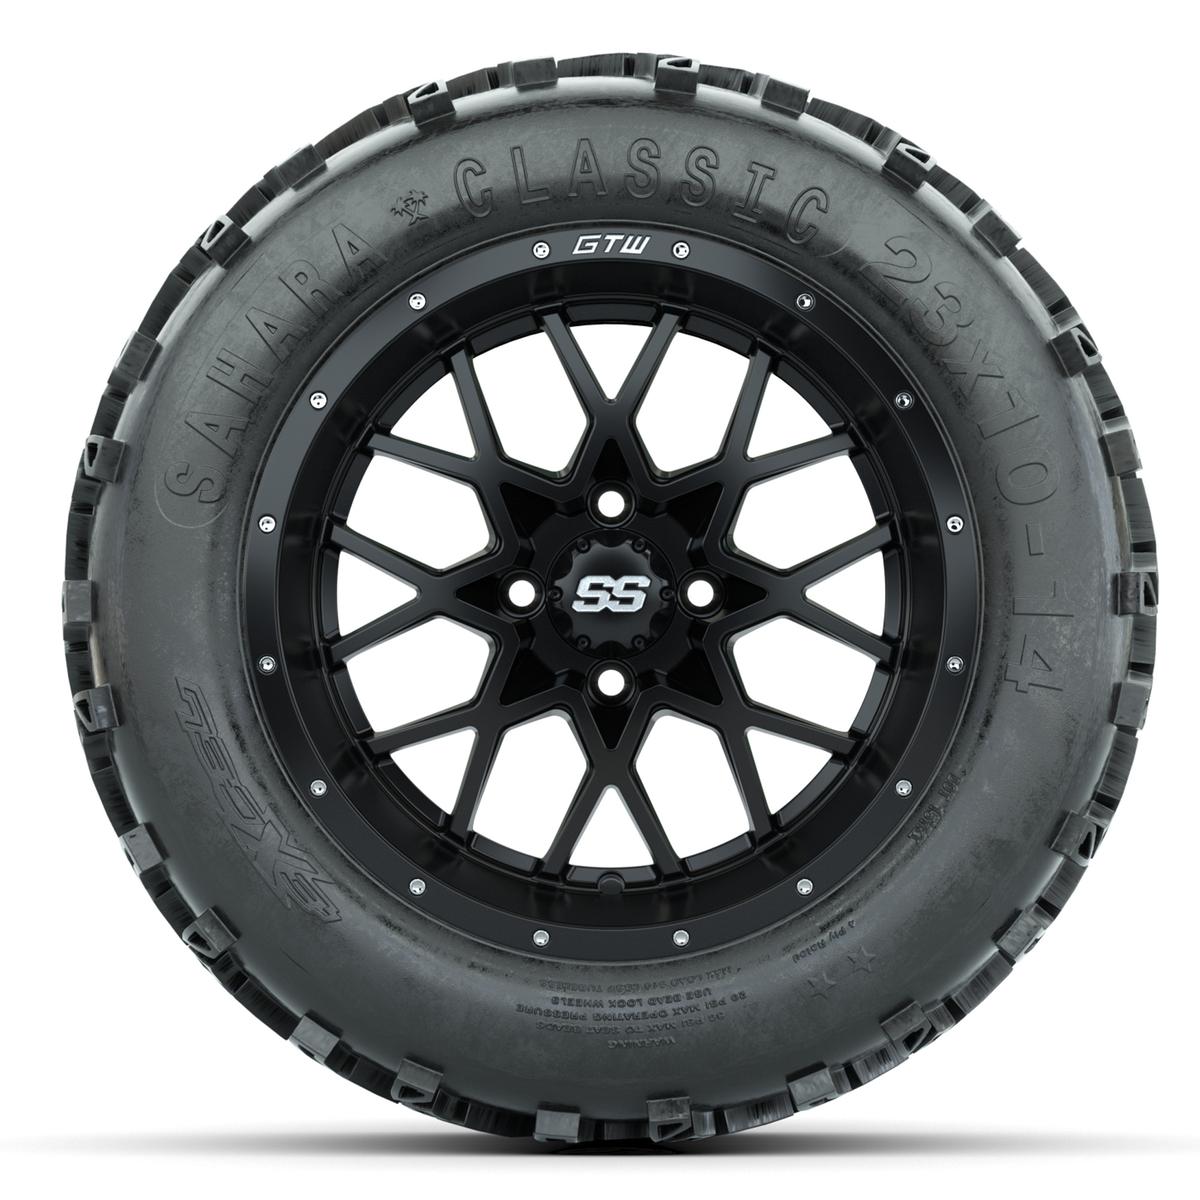 Set of (4) 14 in GTW Vortex Wheels with 23x10-14 Sahara Classic All-Terrain Tires